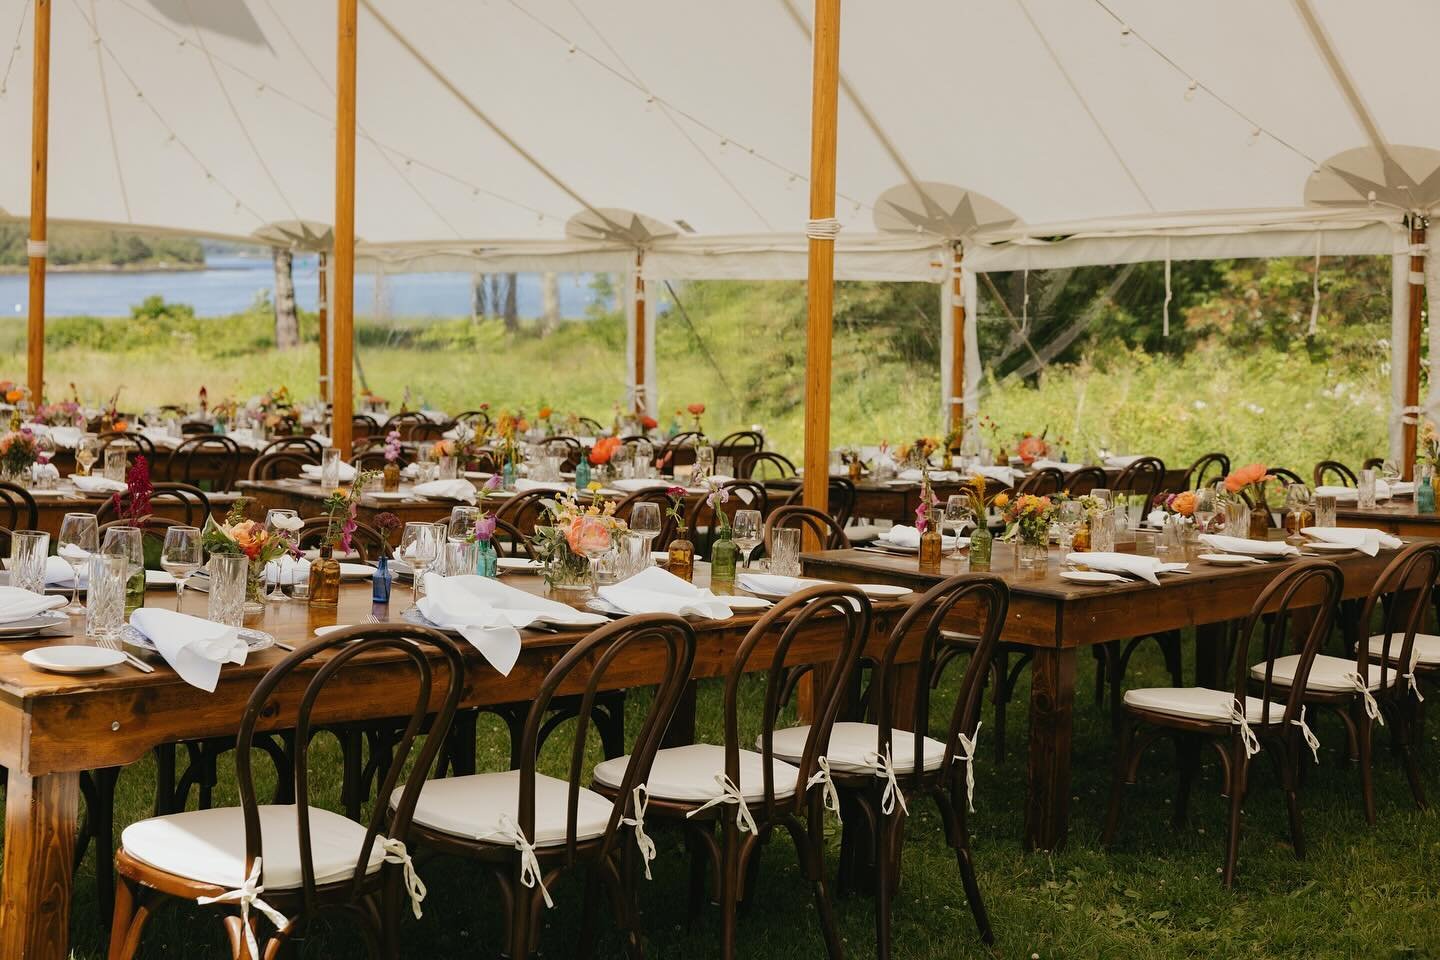 Nothing beats a sailcloth tent with a waterfront view. Hello to another beautiful wedding season in Maine!☀️🌊

&bull;

Photography: @lensymichelle 
Venue: @1774inn 
Event Planning, Day-of Coordination, Catering and Bar Service: @blacktiecateringande